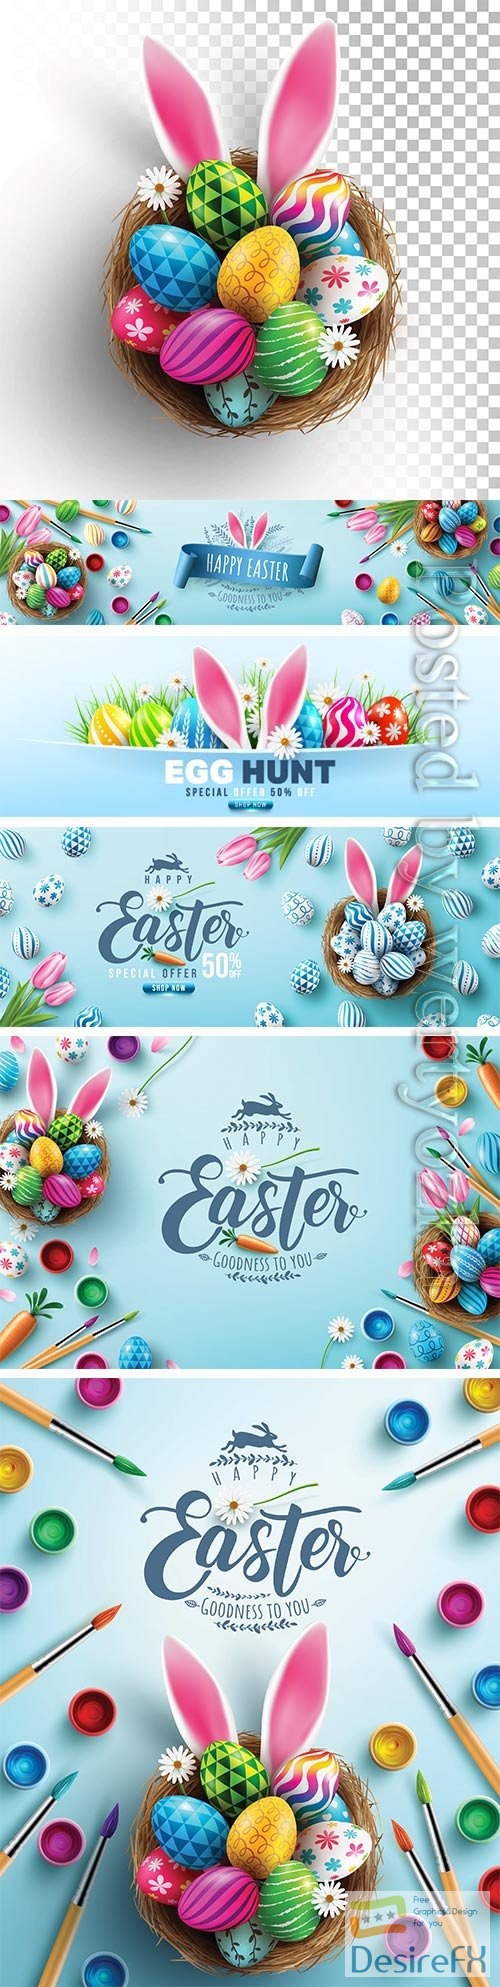 Easter poster and banner vector template with Easter eggs